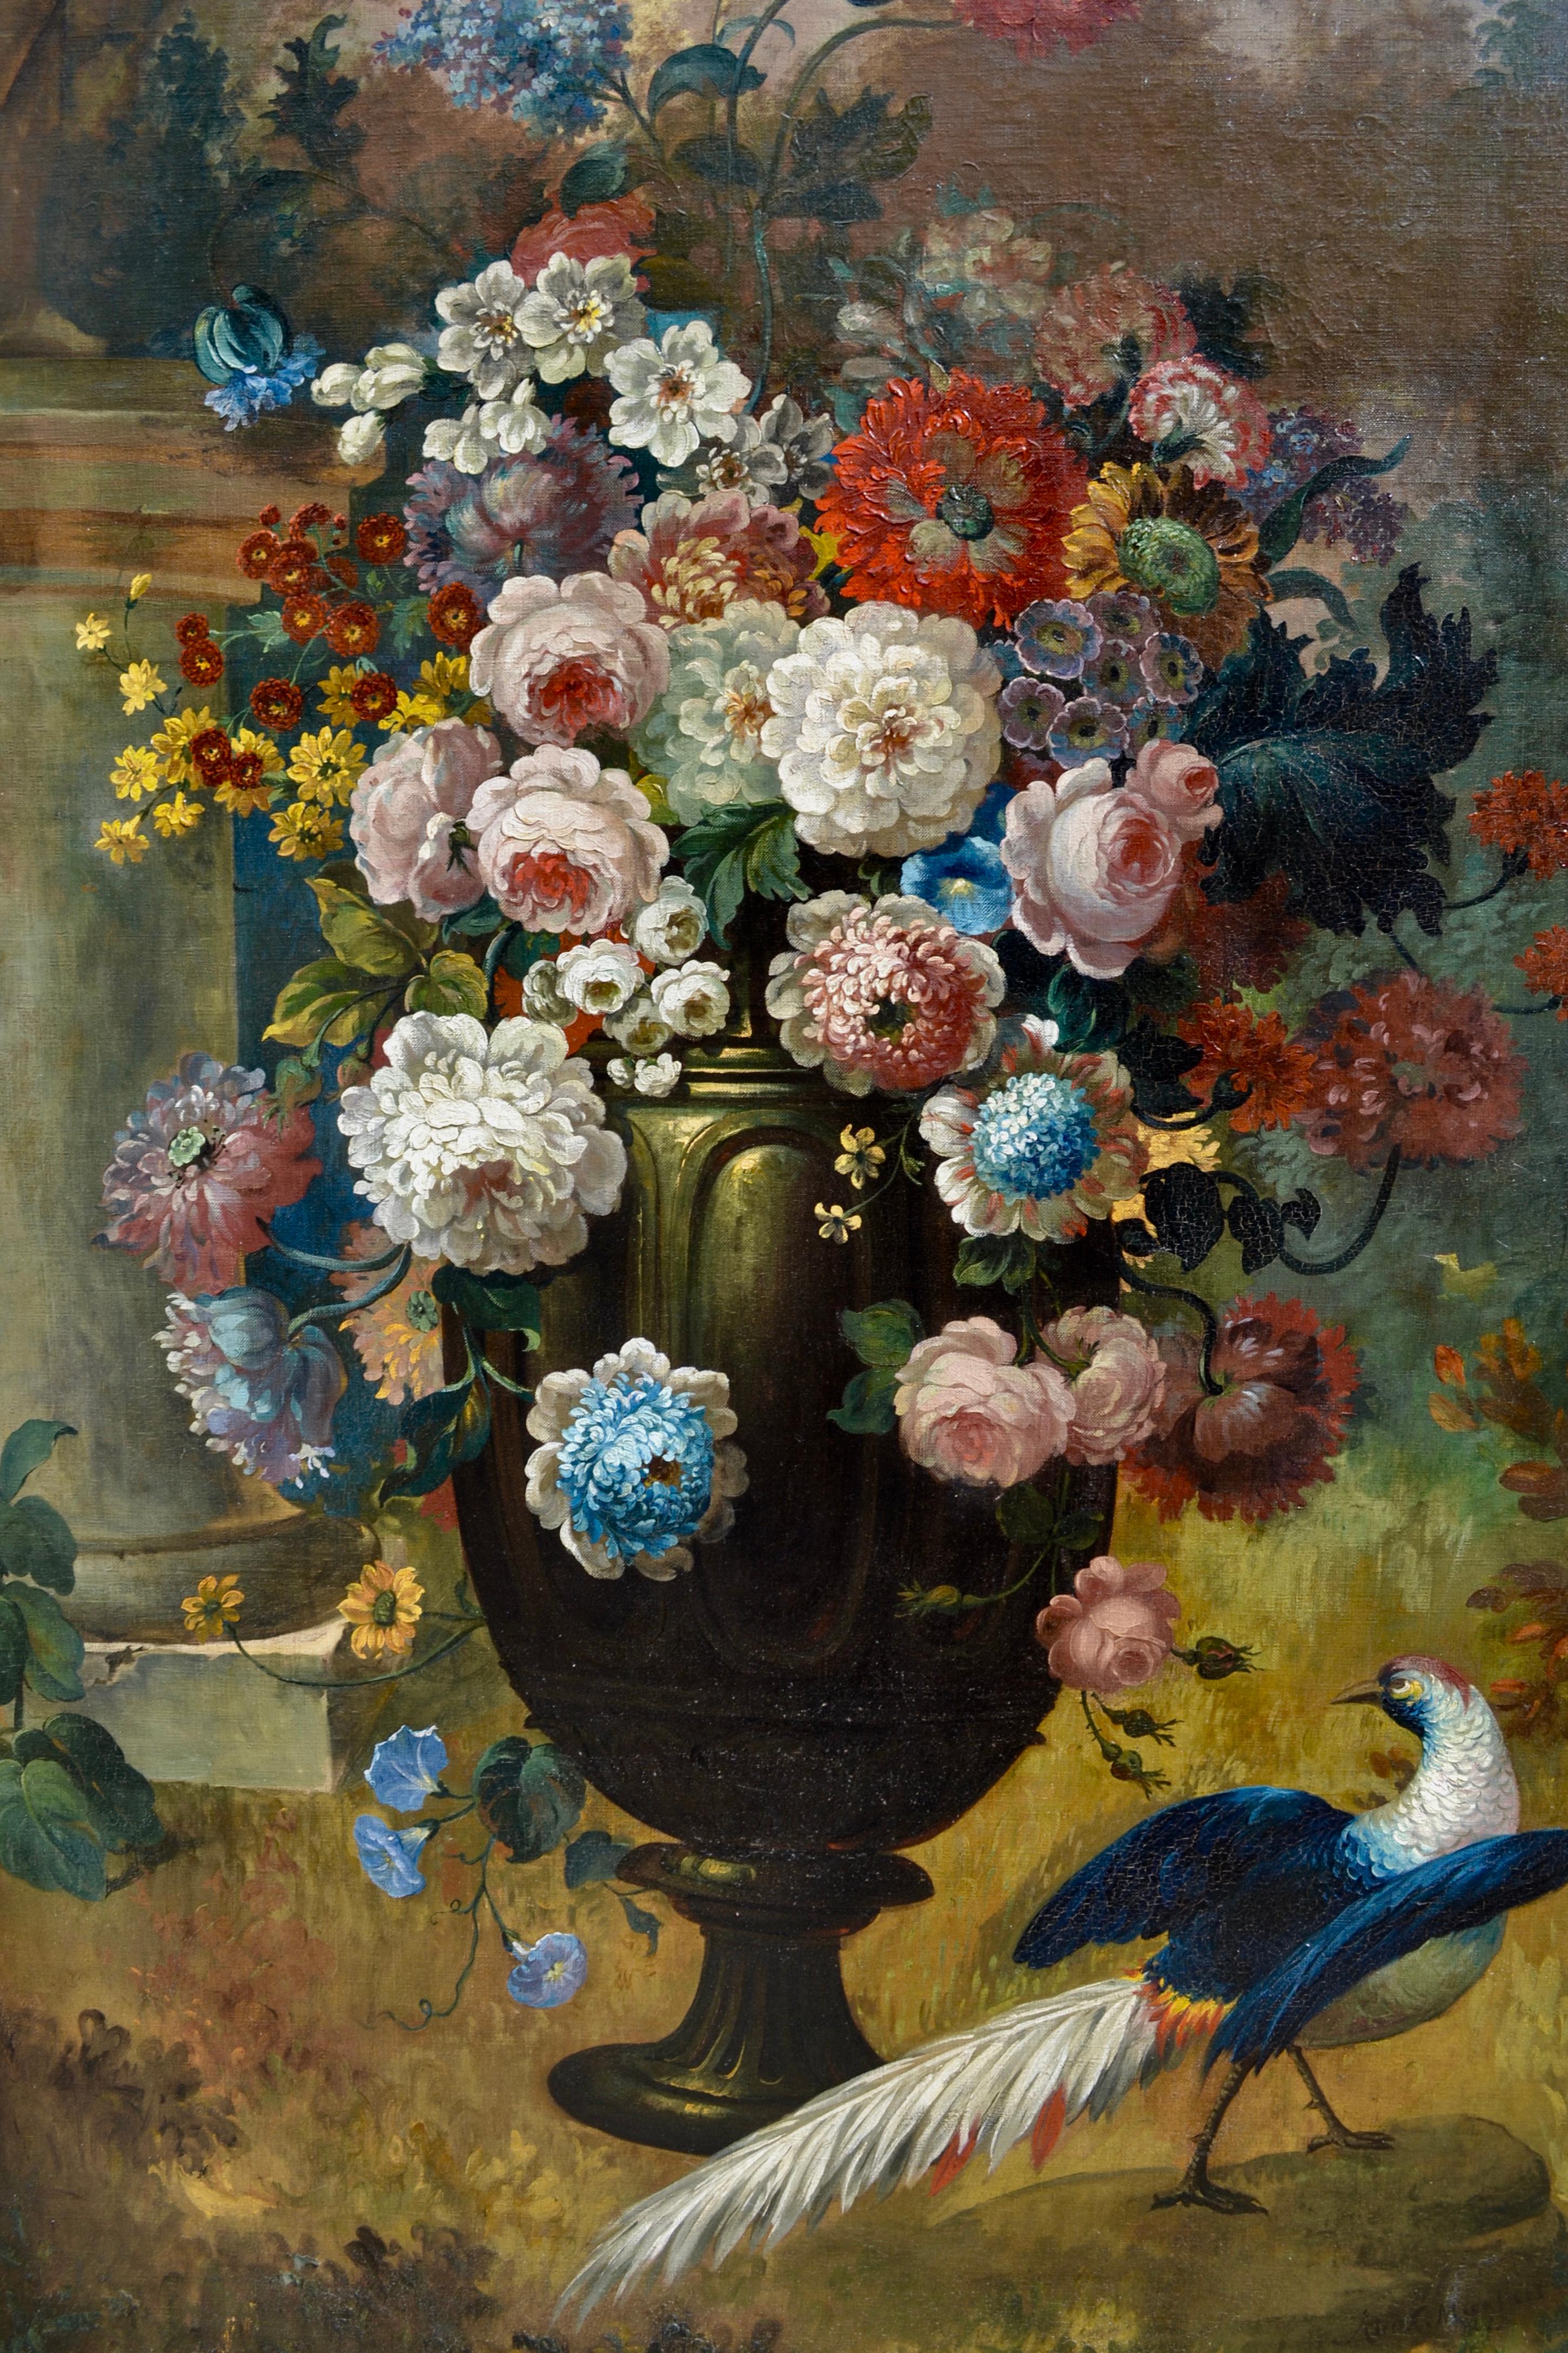 Hand-Painted Large Signed Floral Still Life Painting with a Peacock